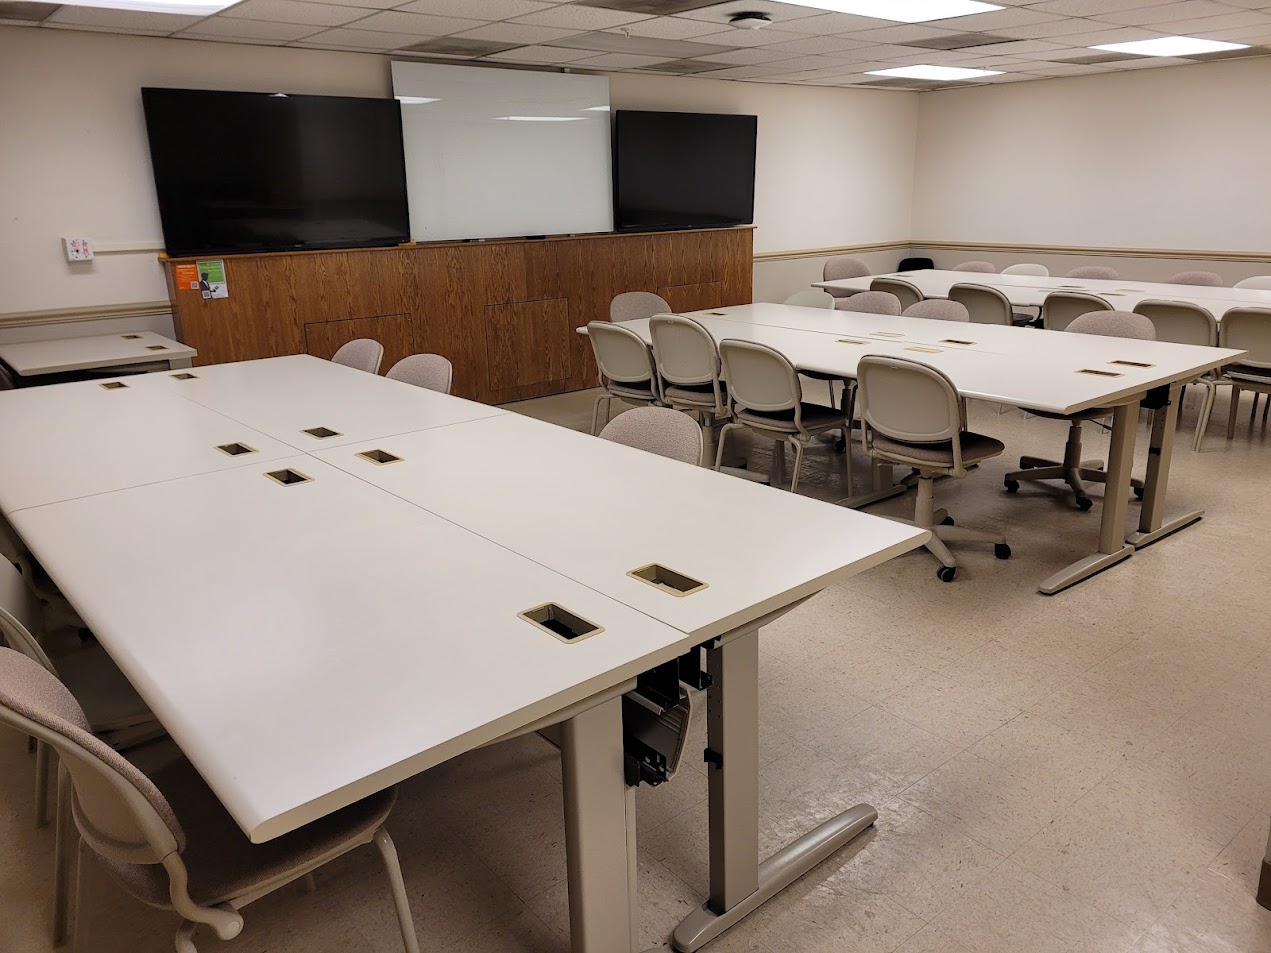 A view of the classroom with student desks, dual flat panel monitors and whiteboard in front.